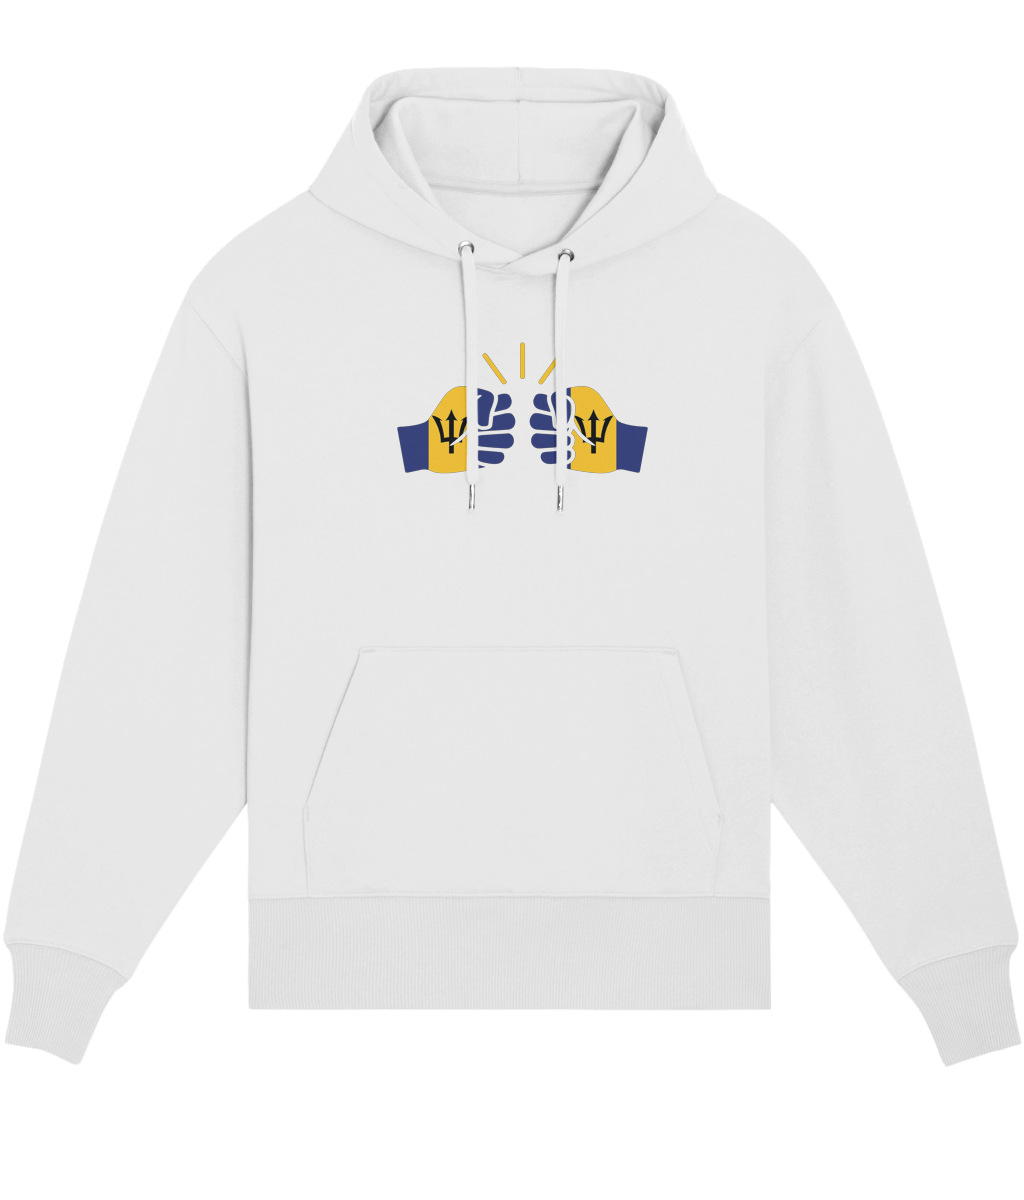 We Run Tings, Barbados, Organic Cotton, Relaxed Fit, Unisex Hoodie